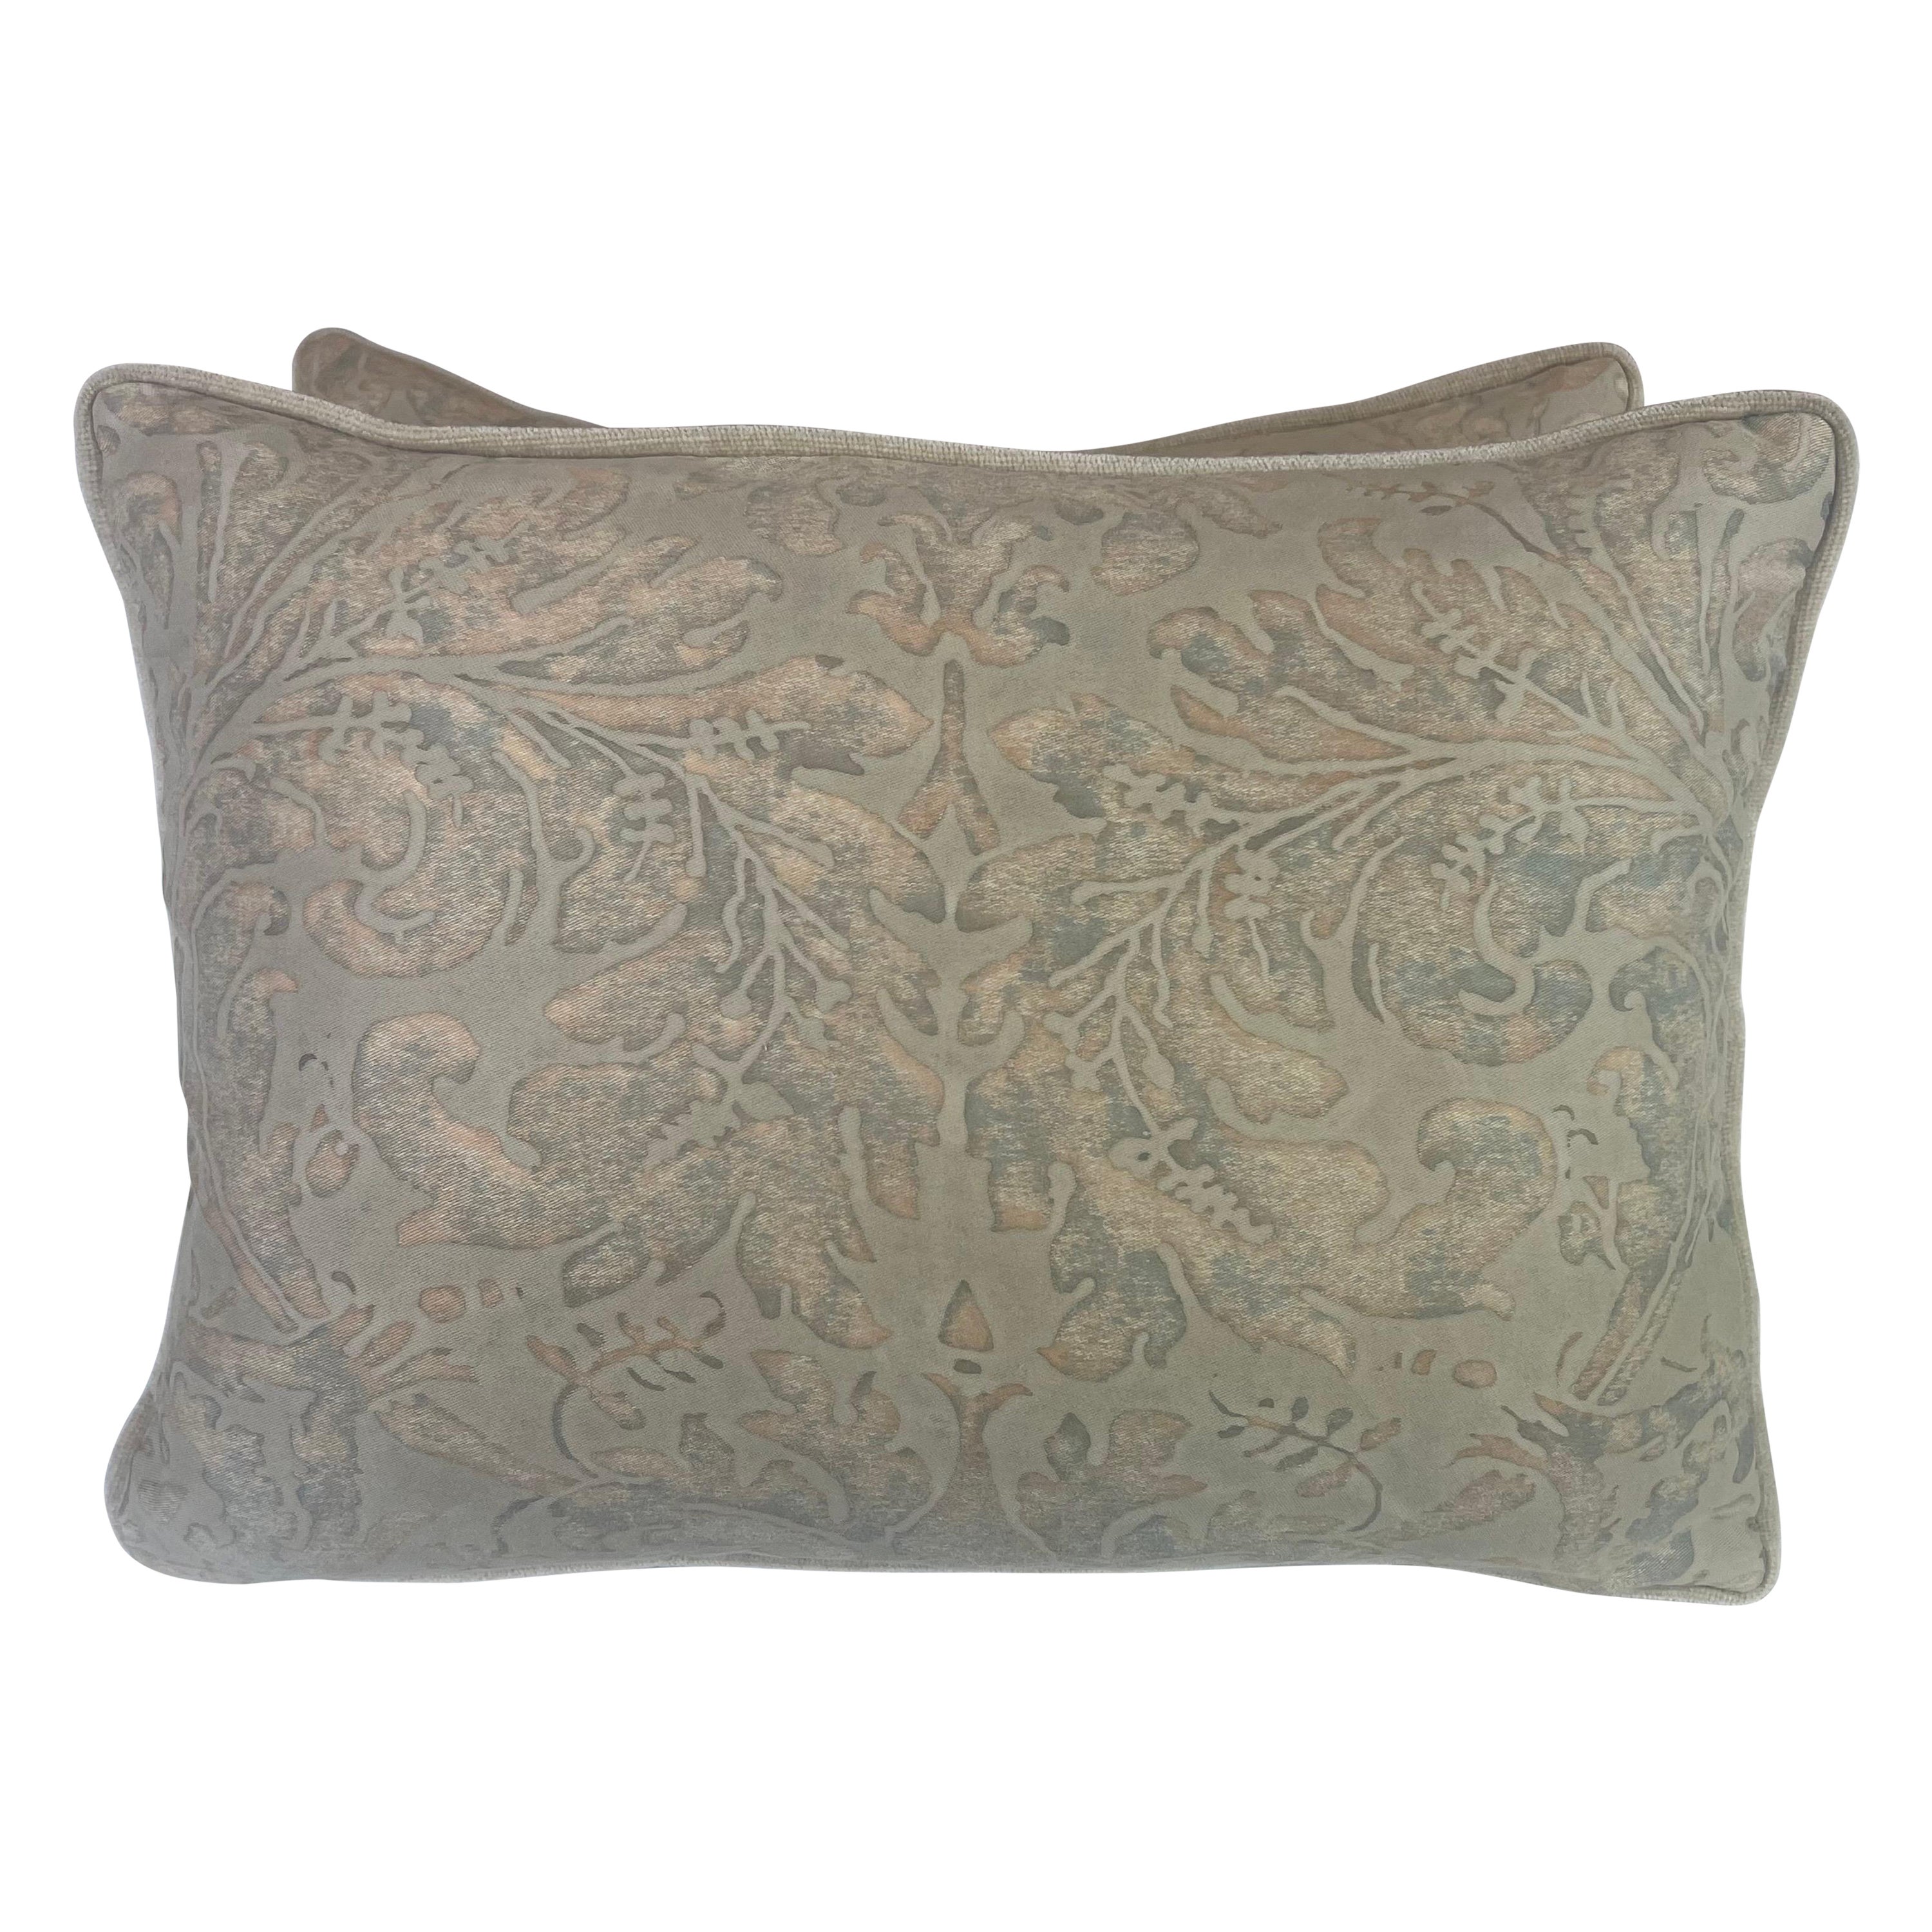 Pair of Lucrenzia Patterned Fortuny Pillows For Sale